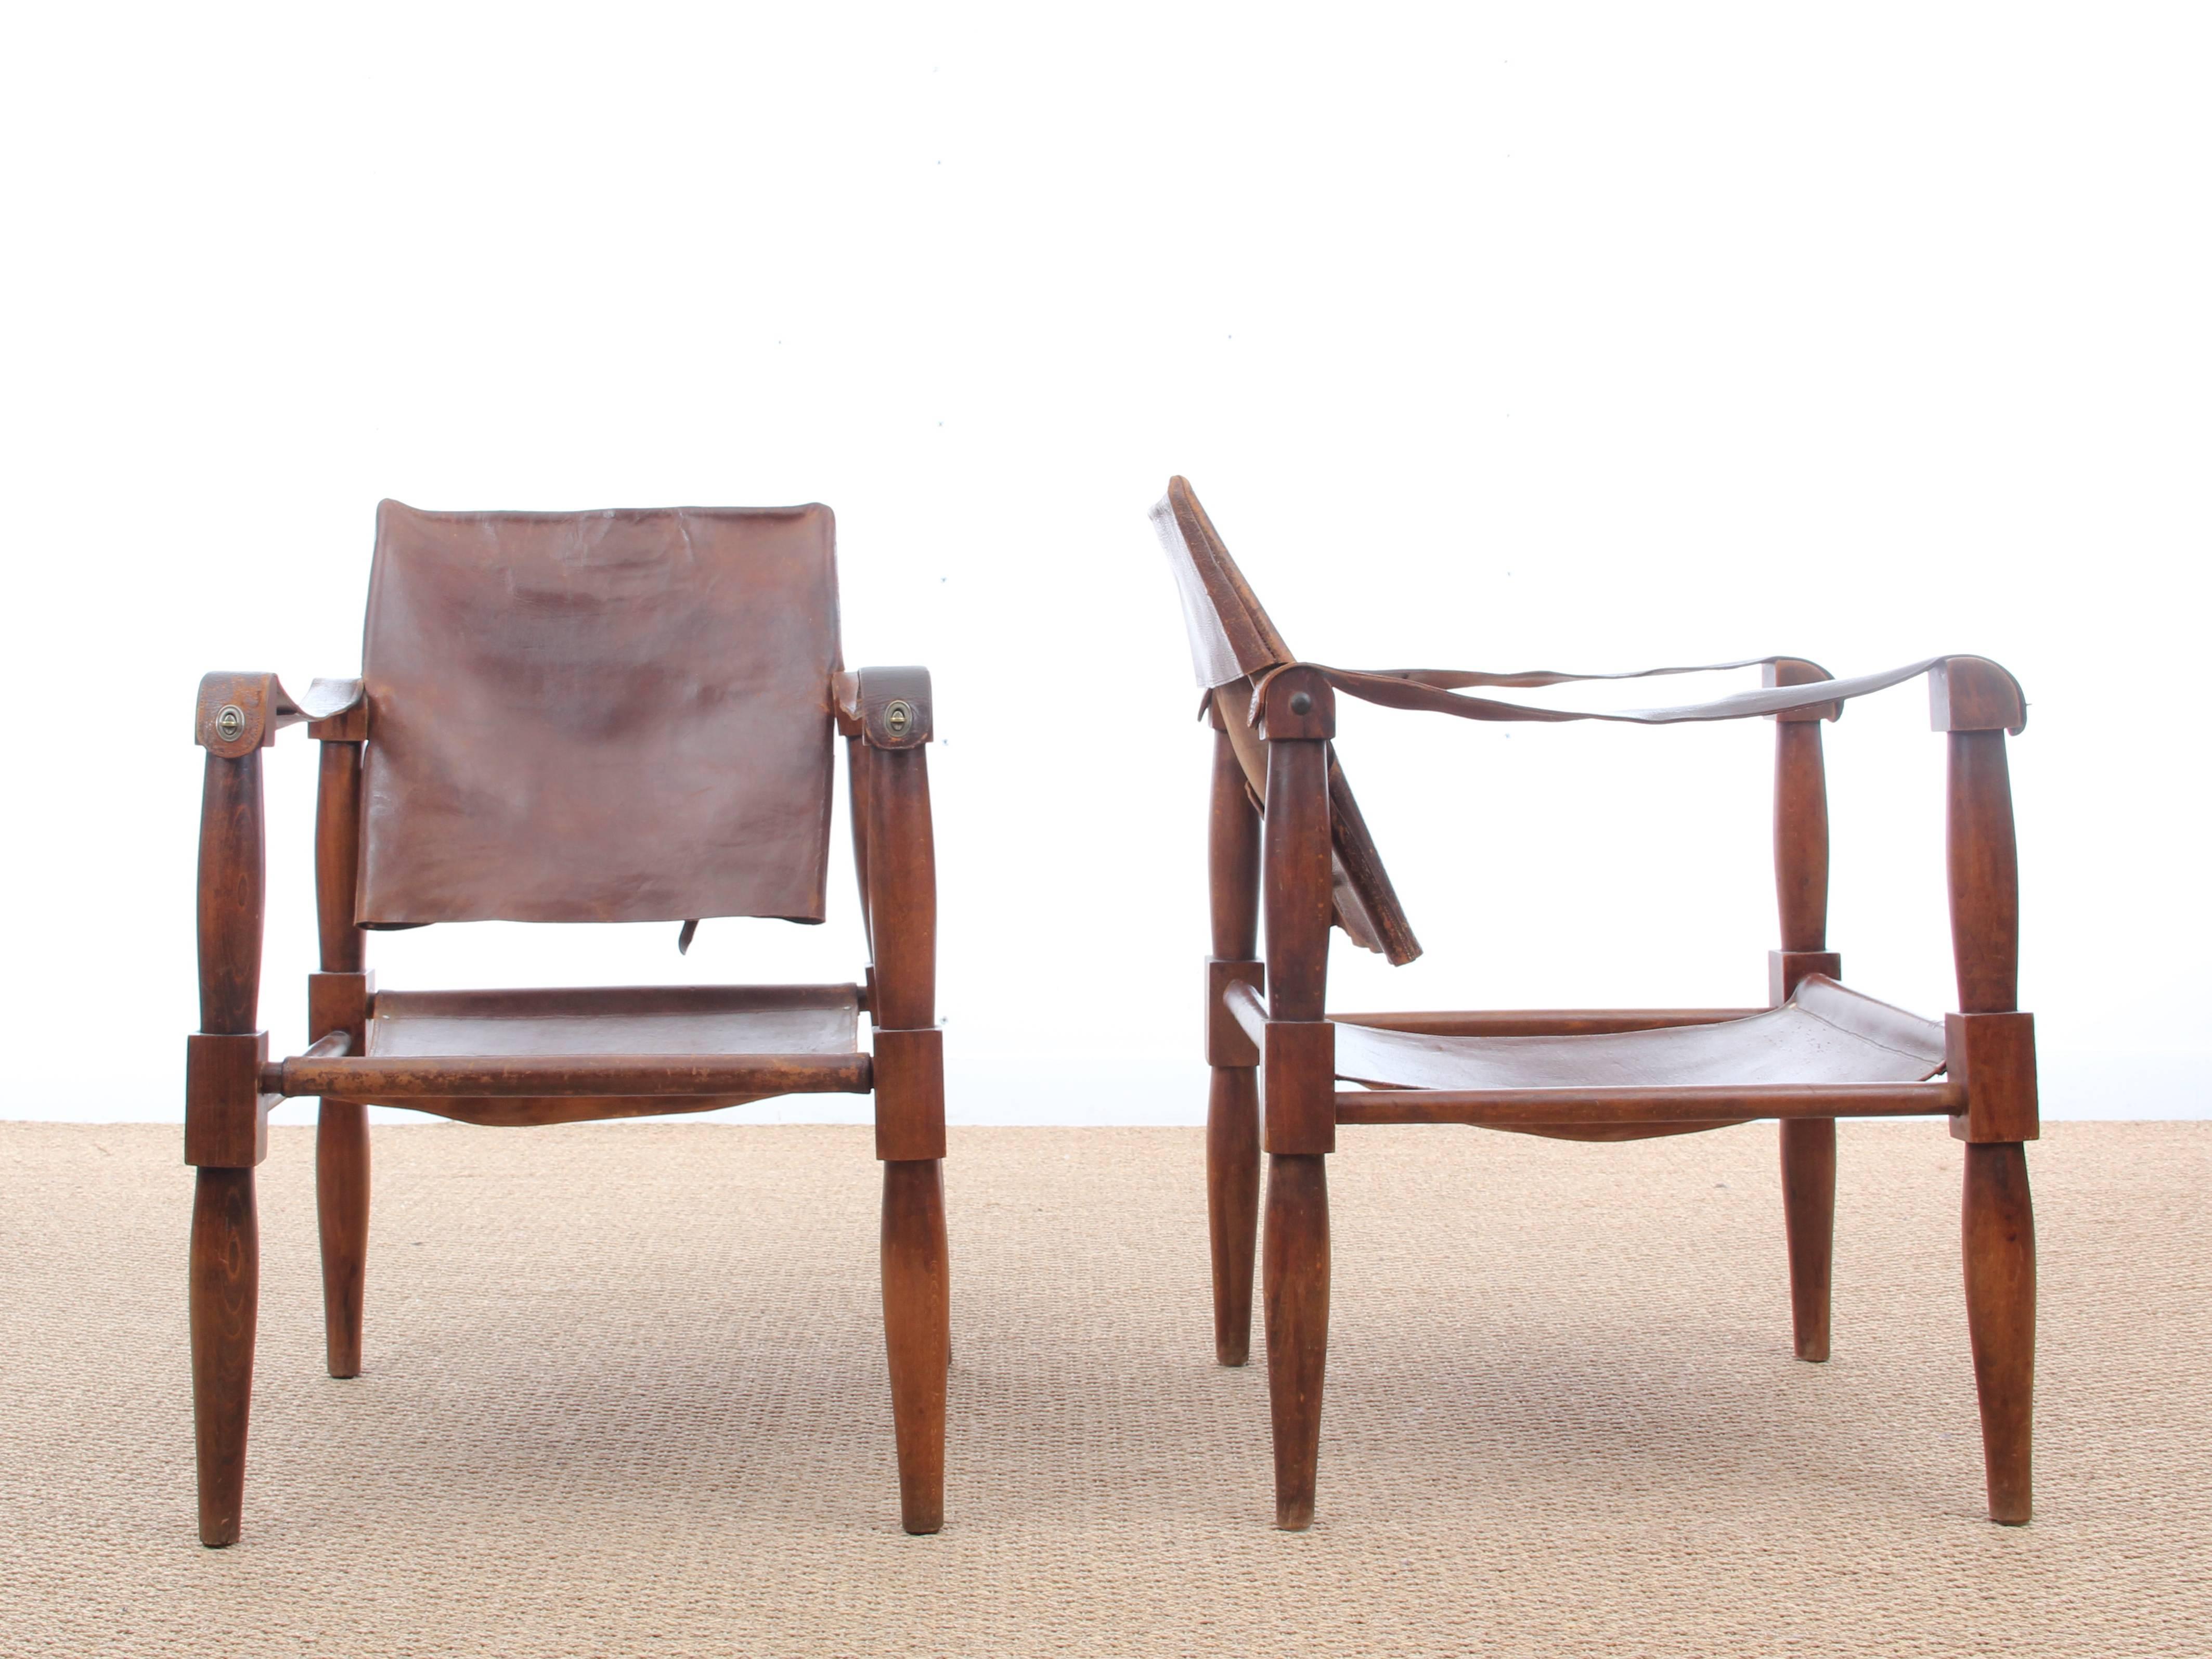 Pair of safari chairs in beech and brow patinated leather. Unknown designer. From the 1940s. Comes with scratch and cracks. Price for the pair.